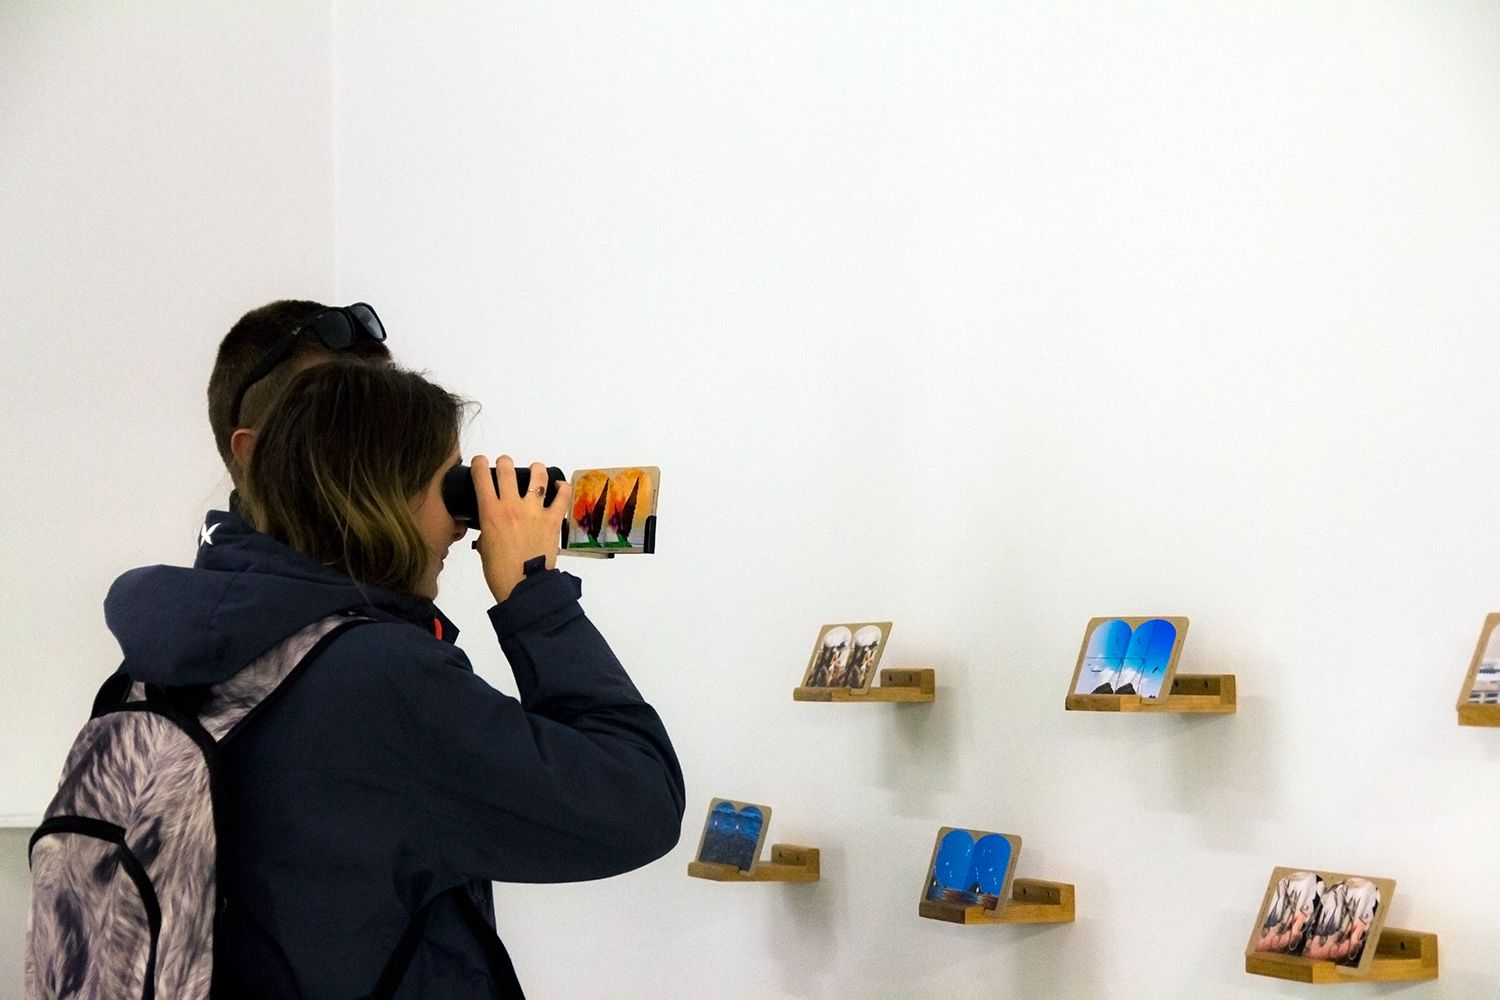 A visitor peers into a stereoscope. More stereoscope slides are affixed to the wall.